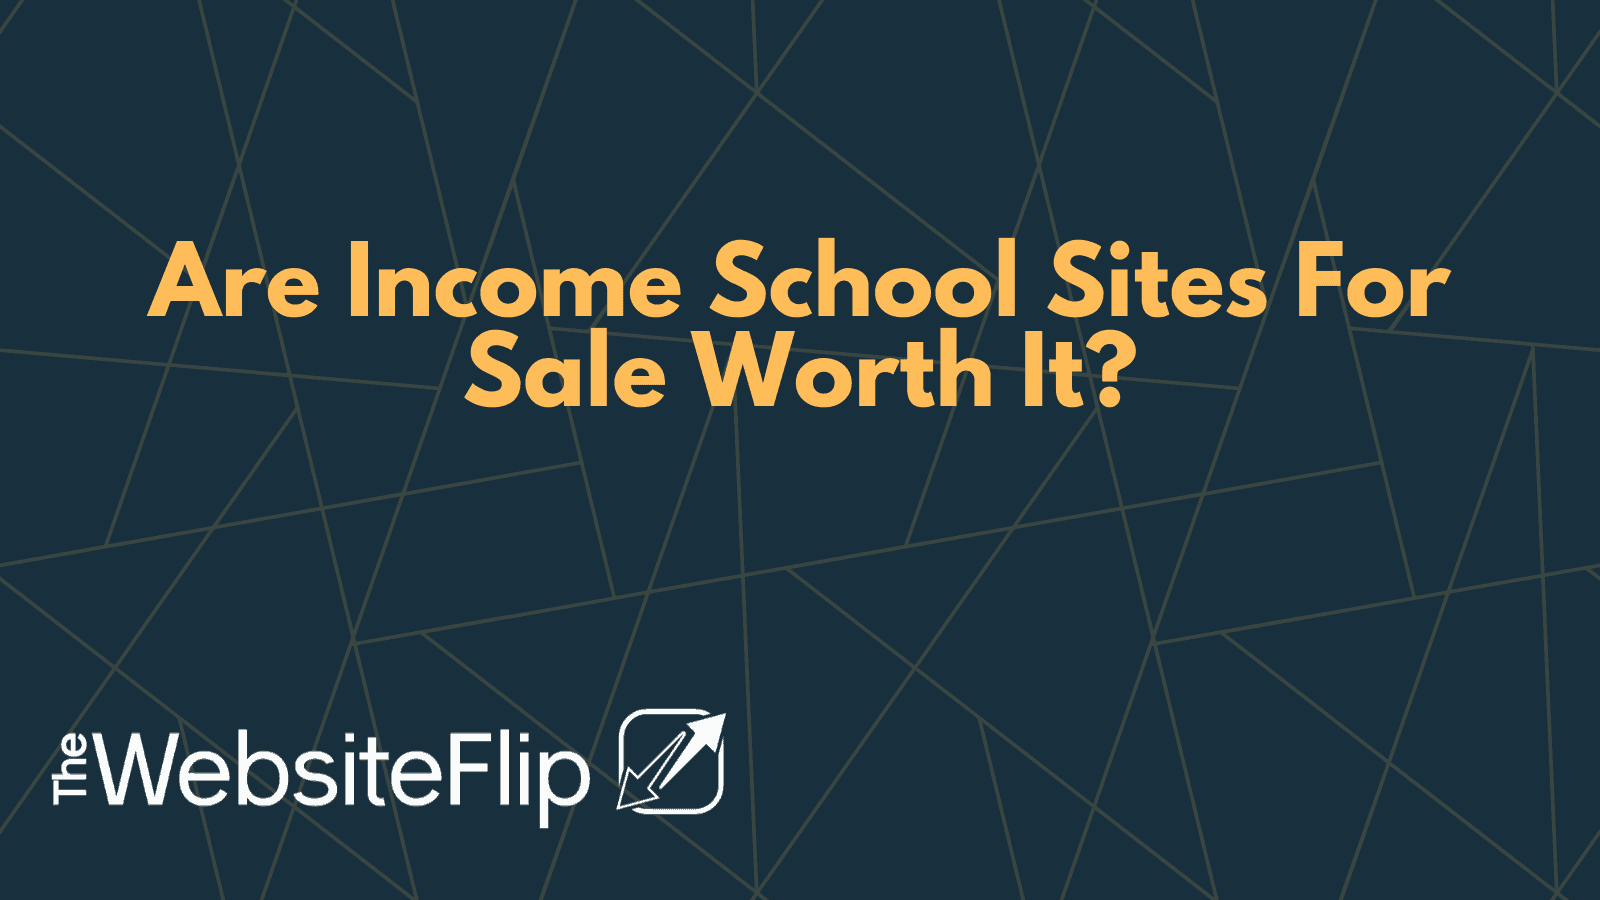 Are Income School Sites For Sale Worth It